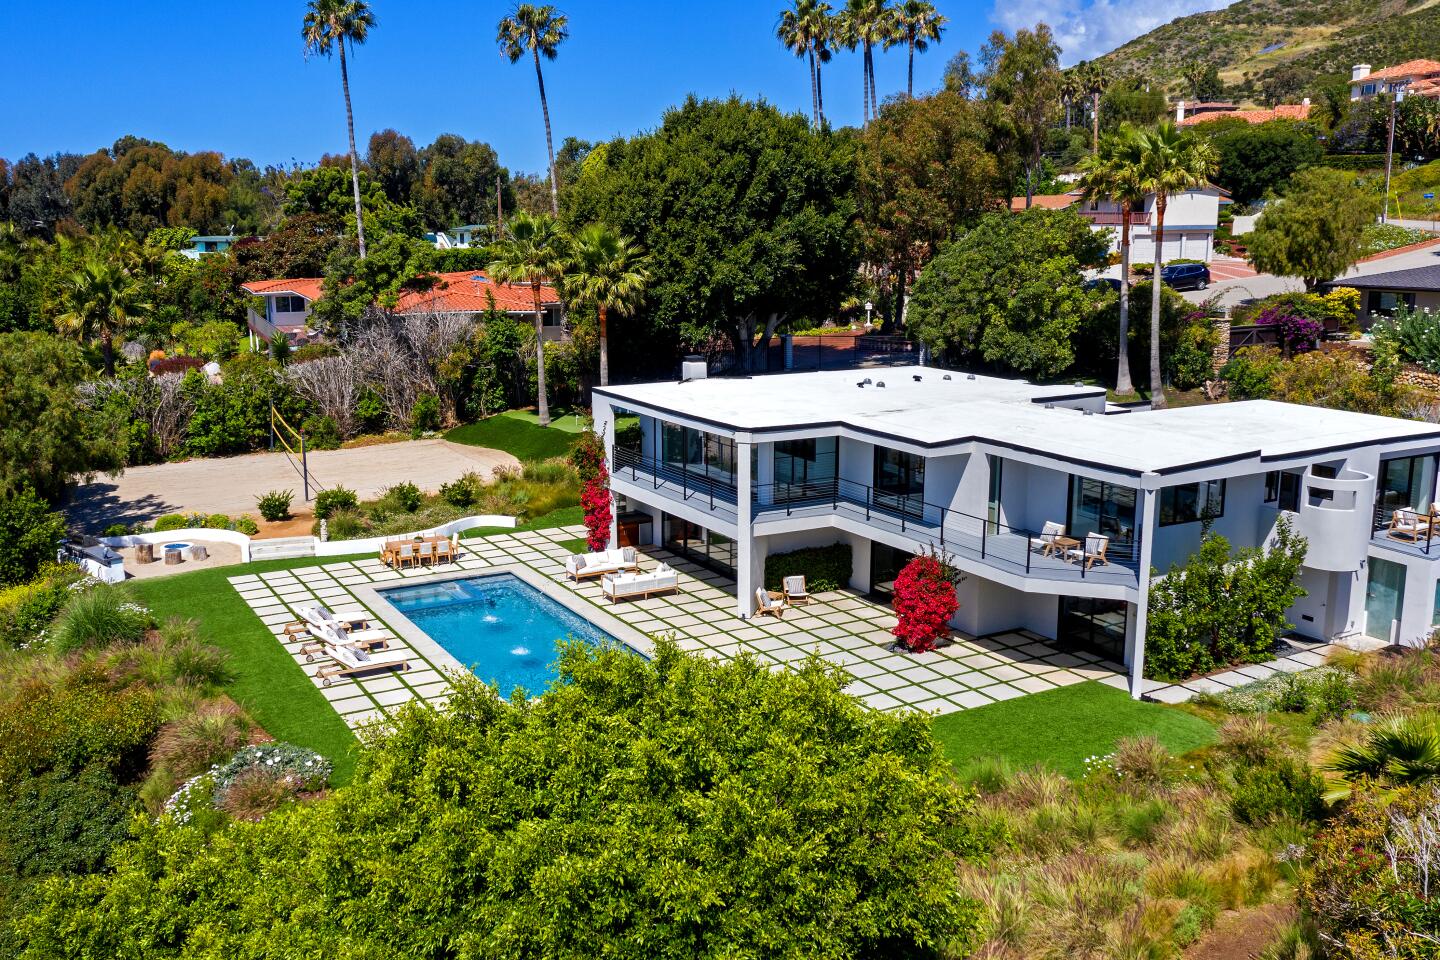 The longtime Malibu home of Robert Conrad sits across from the beach where "The Wild, Wild West" actor learned to surf in the 1950s.